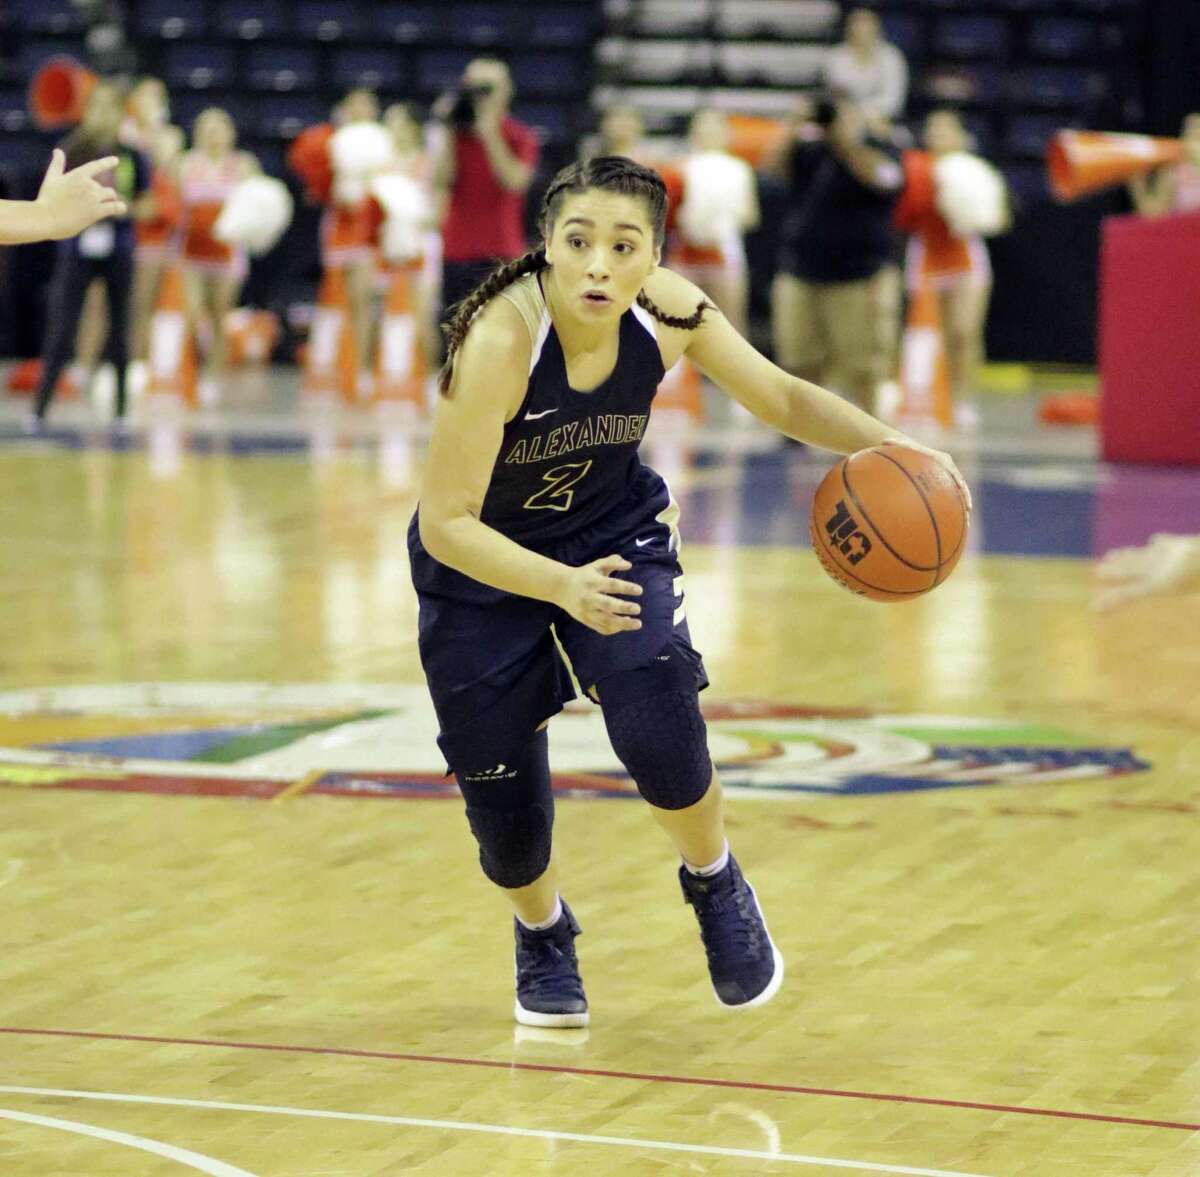 Dannia González averaged a double-double with 13 points and 10 rebounds in her senior season at Alexander.